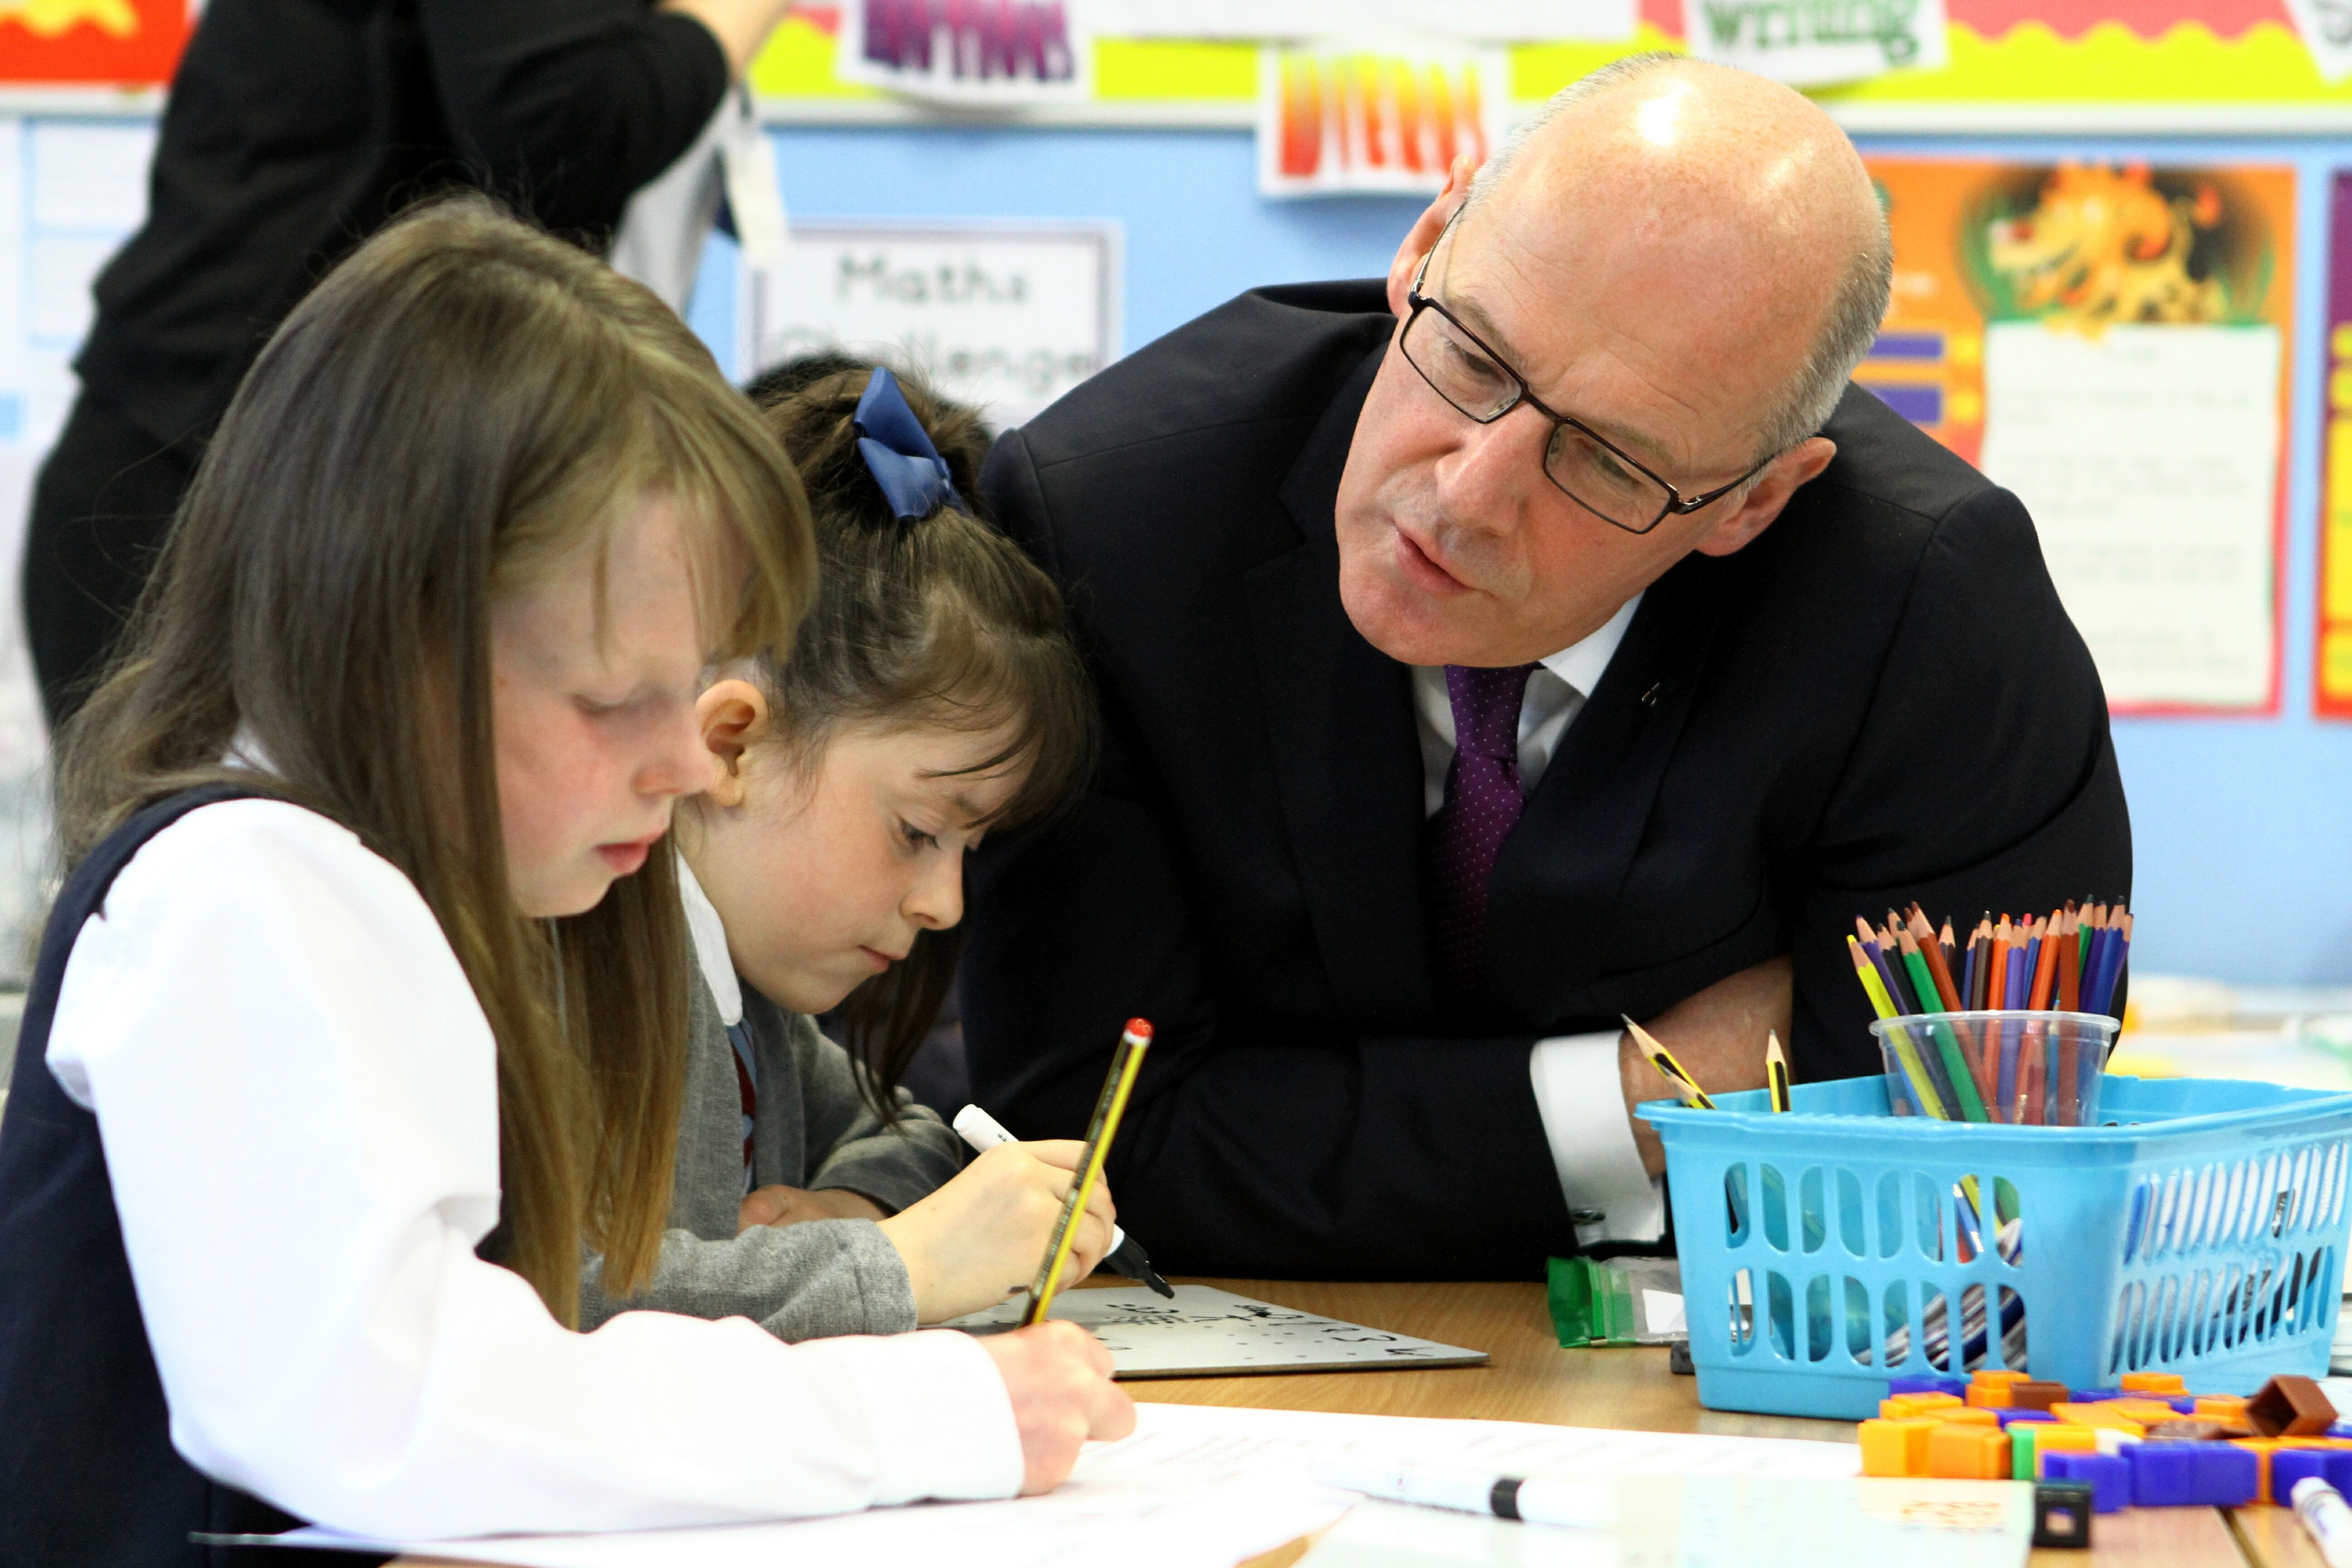 Hundreds of new Scottish teachers are quitting profession or moving abroad  - The Sunday Post